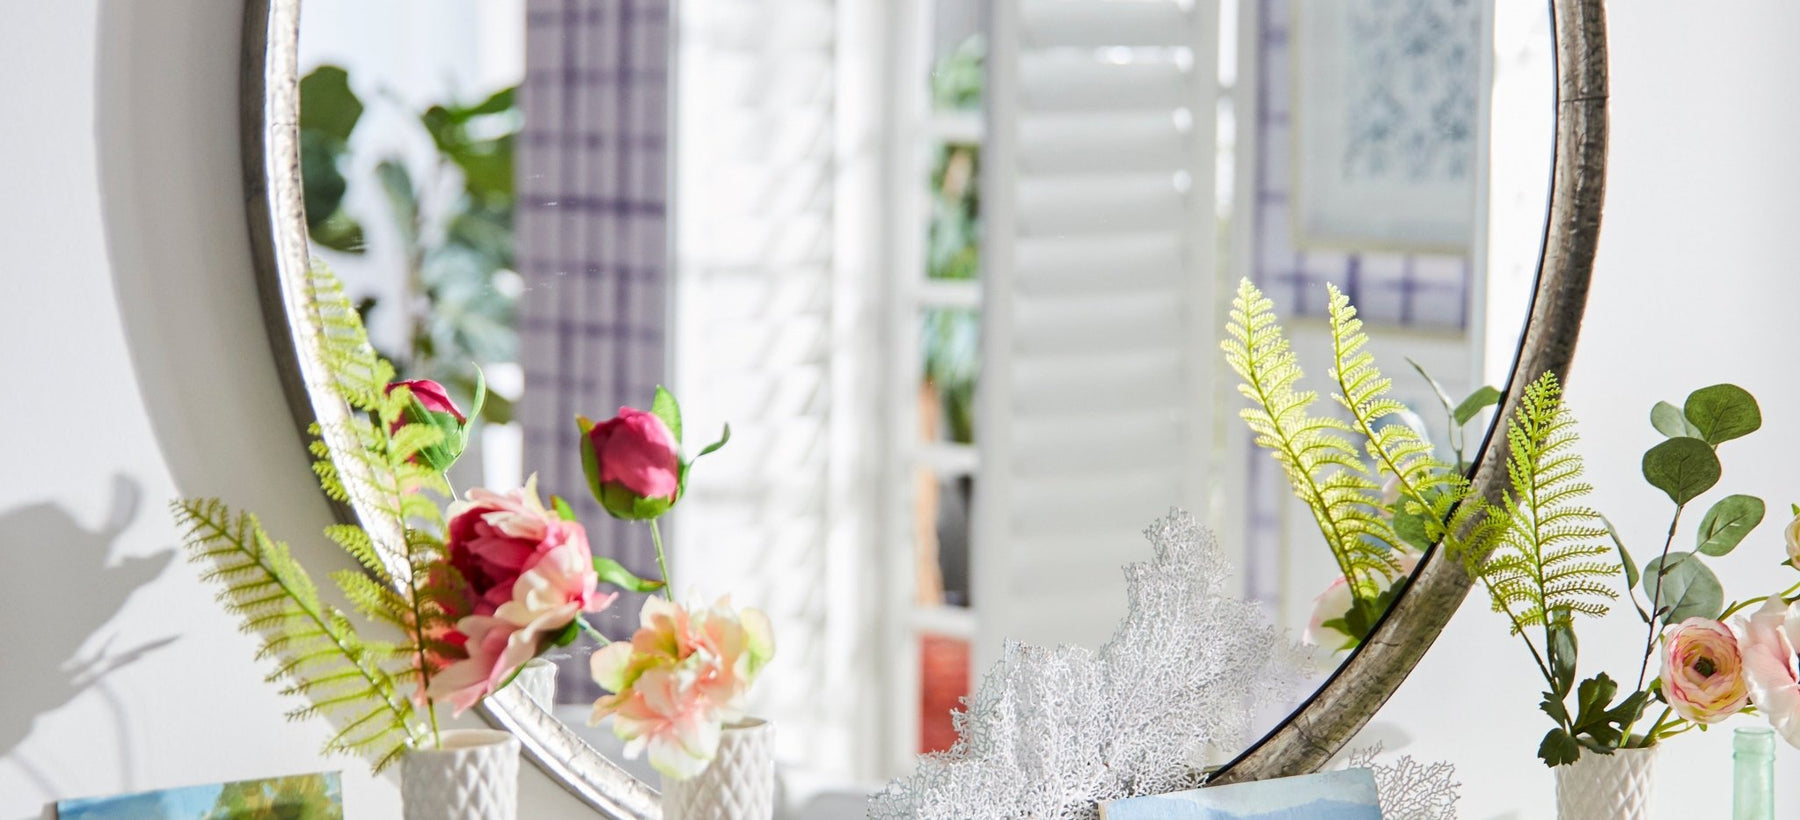 15 Ways to Refresh Your Home with Spring Decor - Pier 1